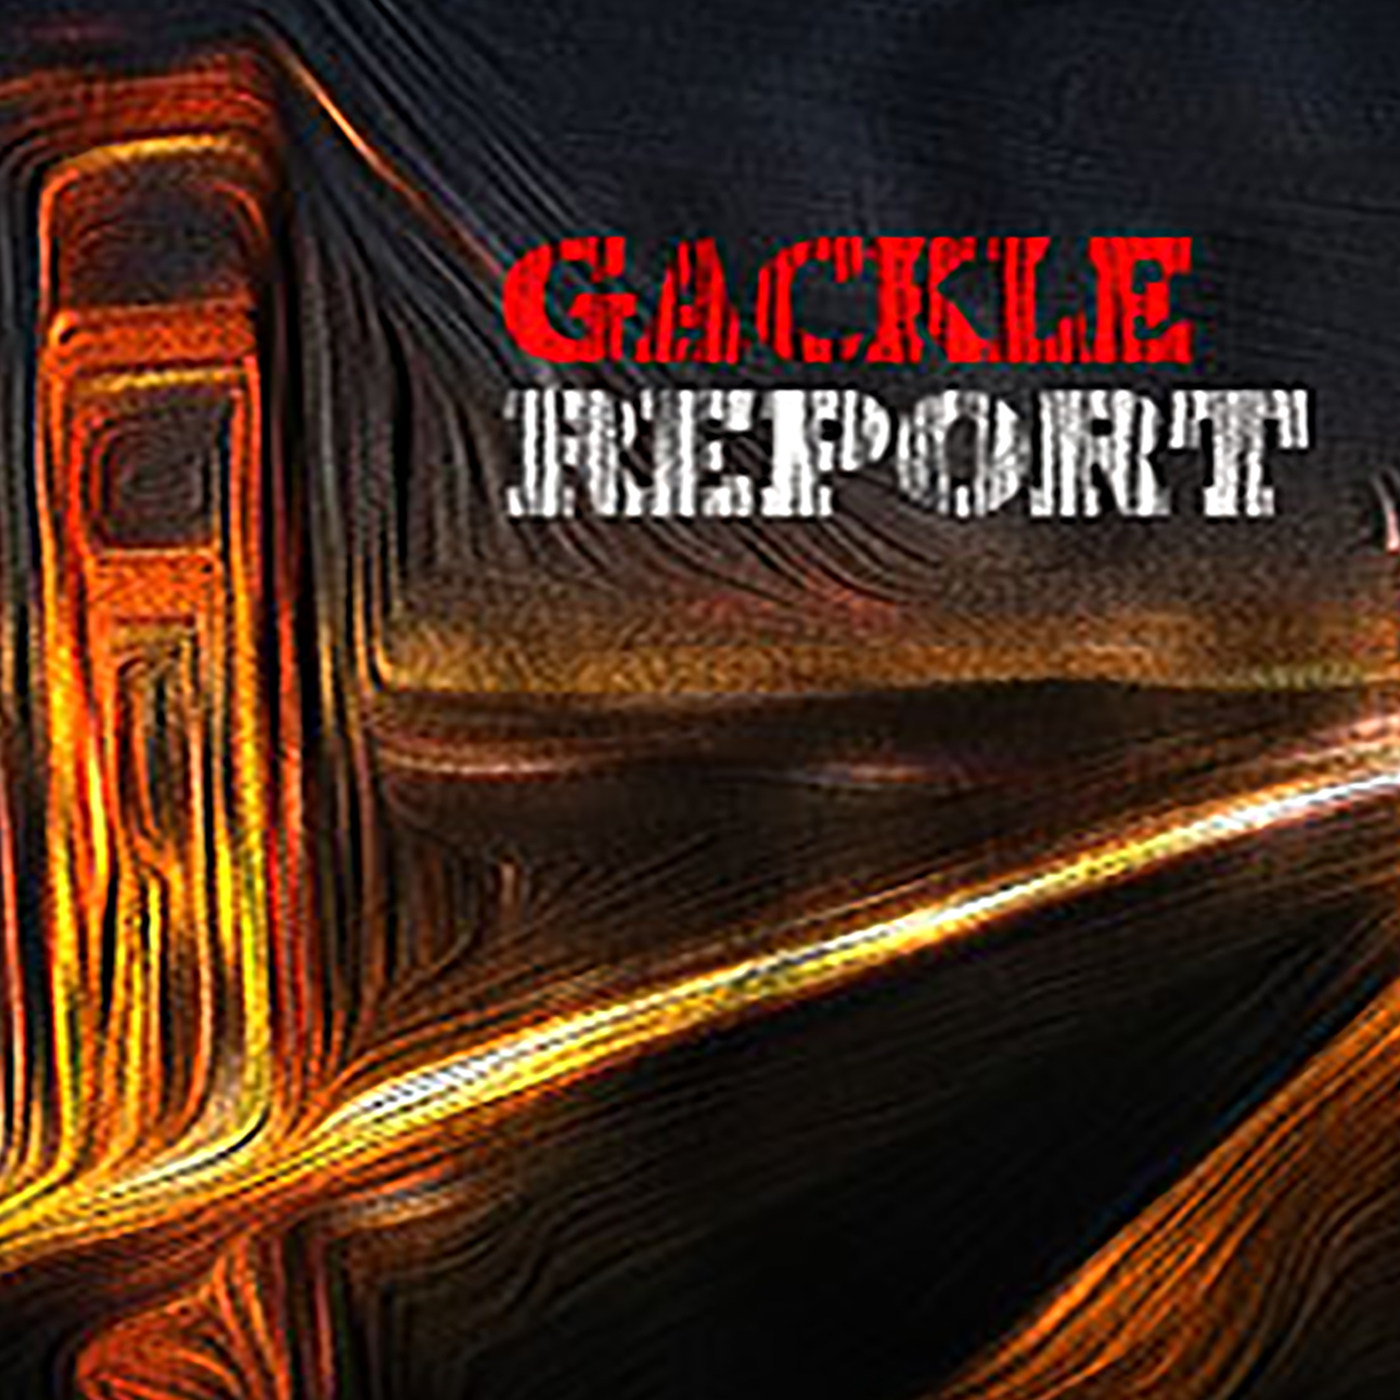 The Gackle Report